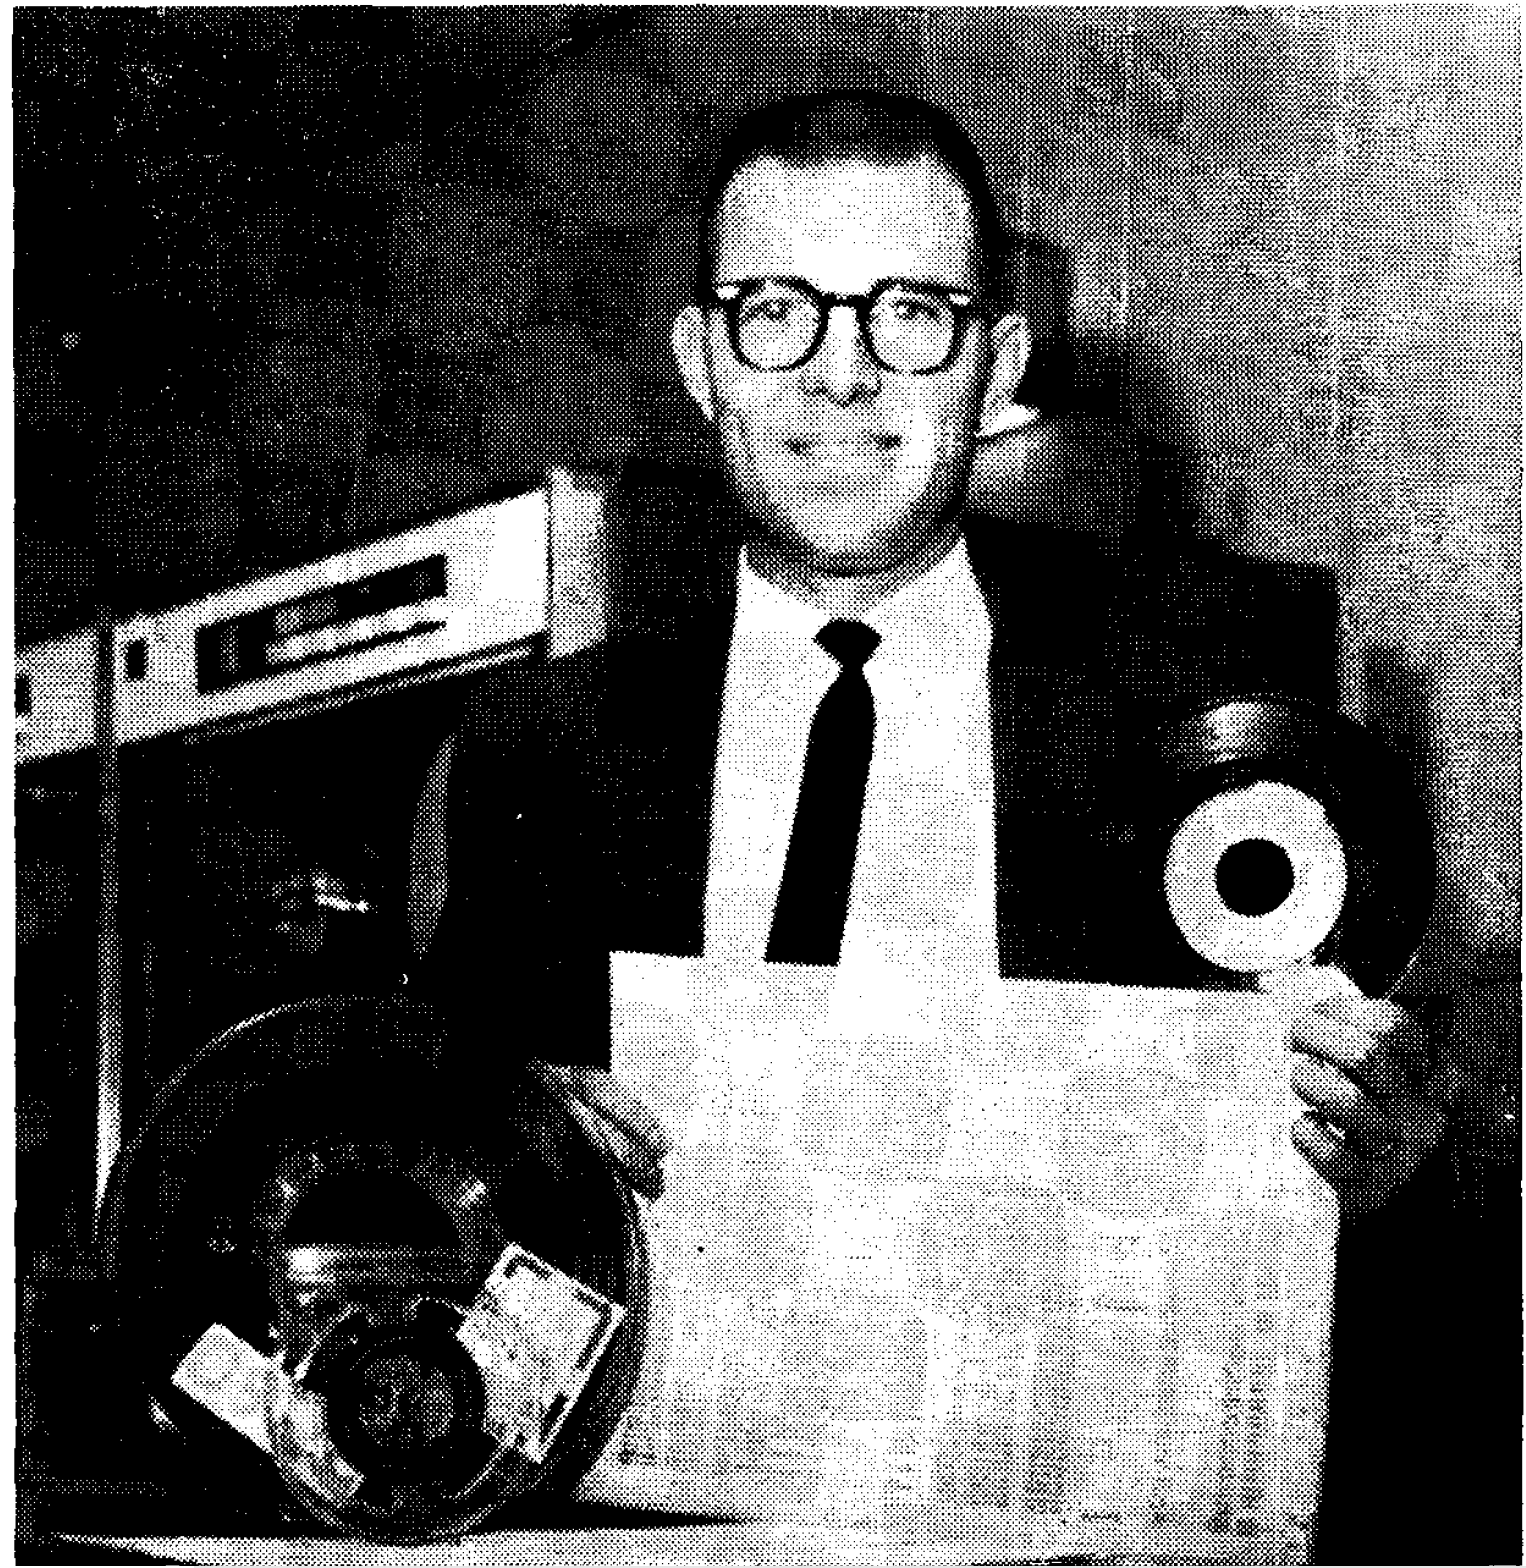 Jerry Huffman in 1965 with a recording of his song “You Don’t Hear,” along with computer tapes and printouts in the Computation Laboratory. 